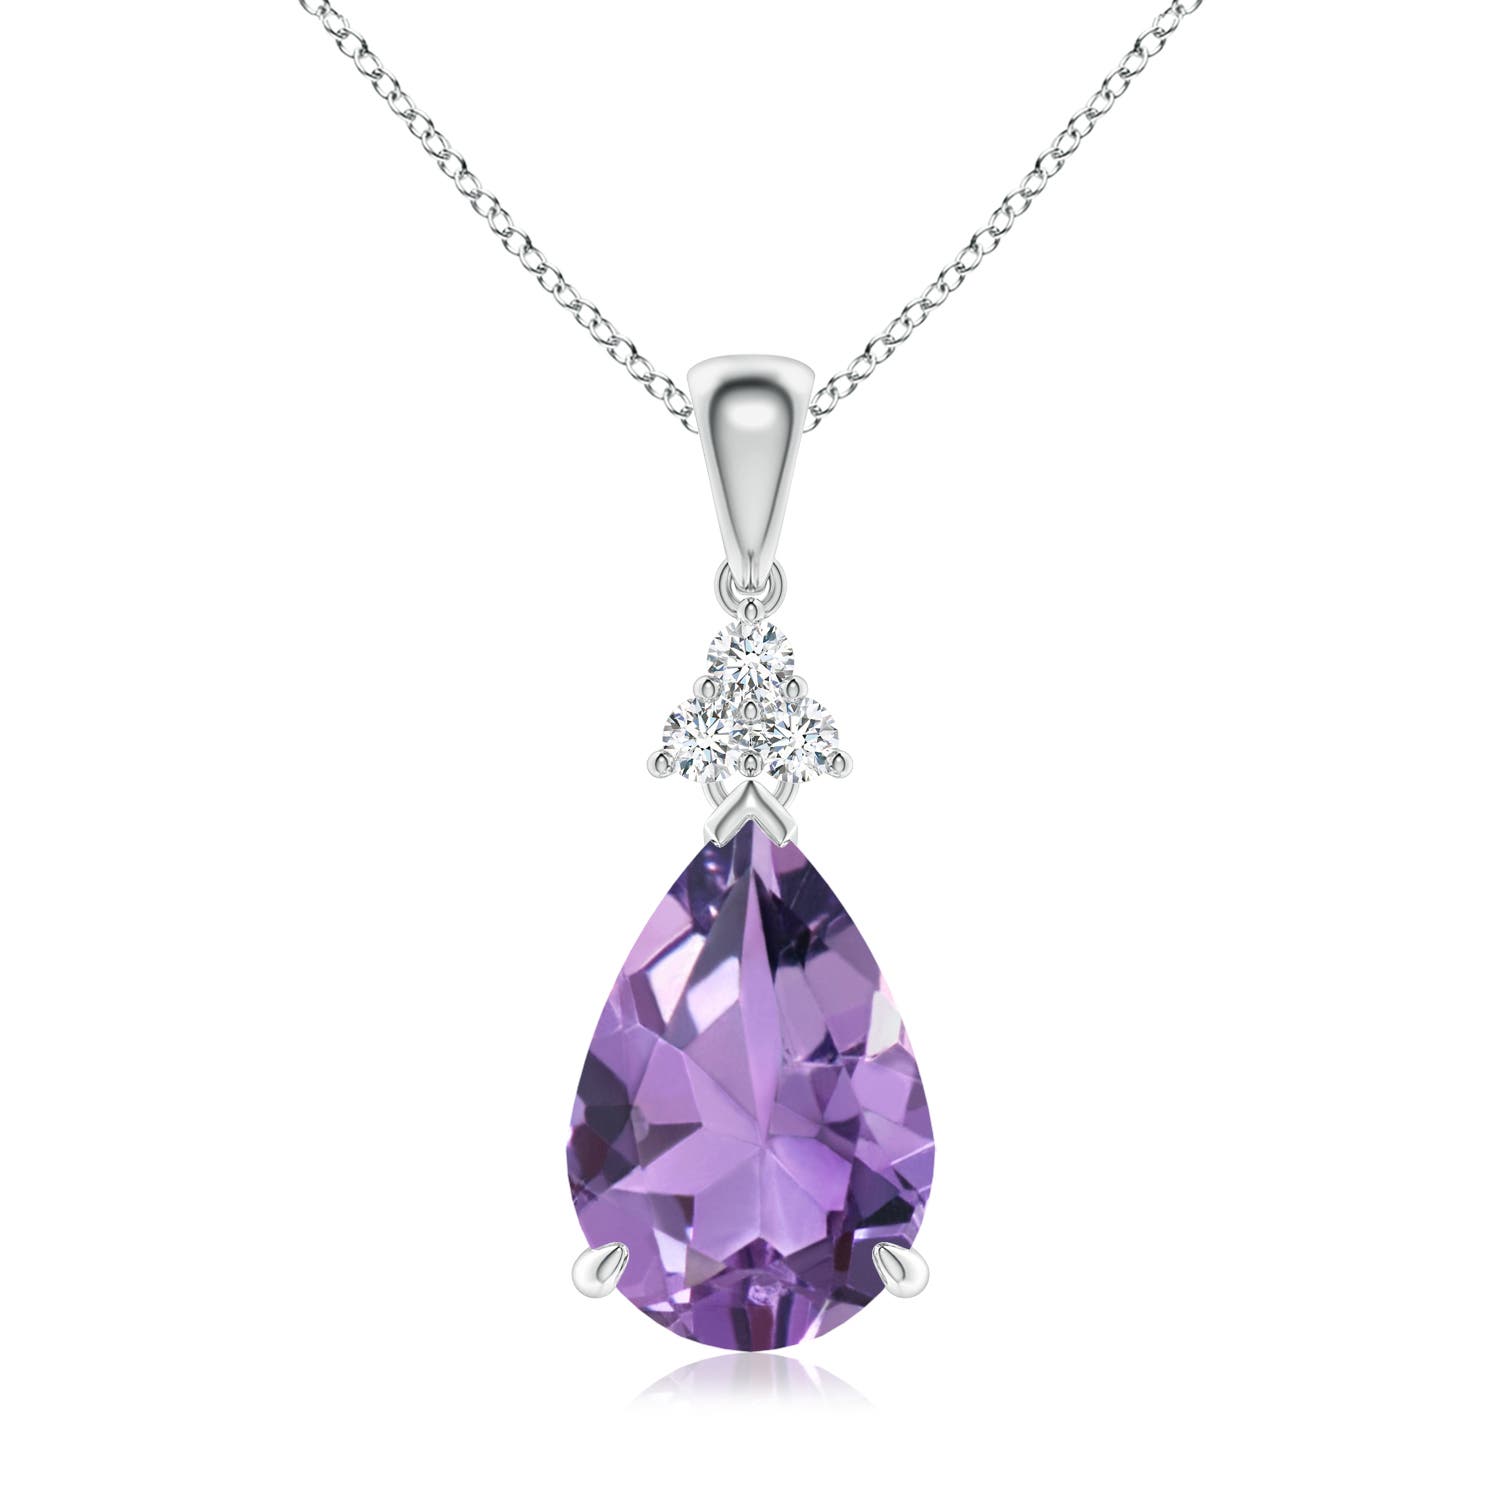 A - Amethyst / 2.71 CT / 14 KT White Gold